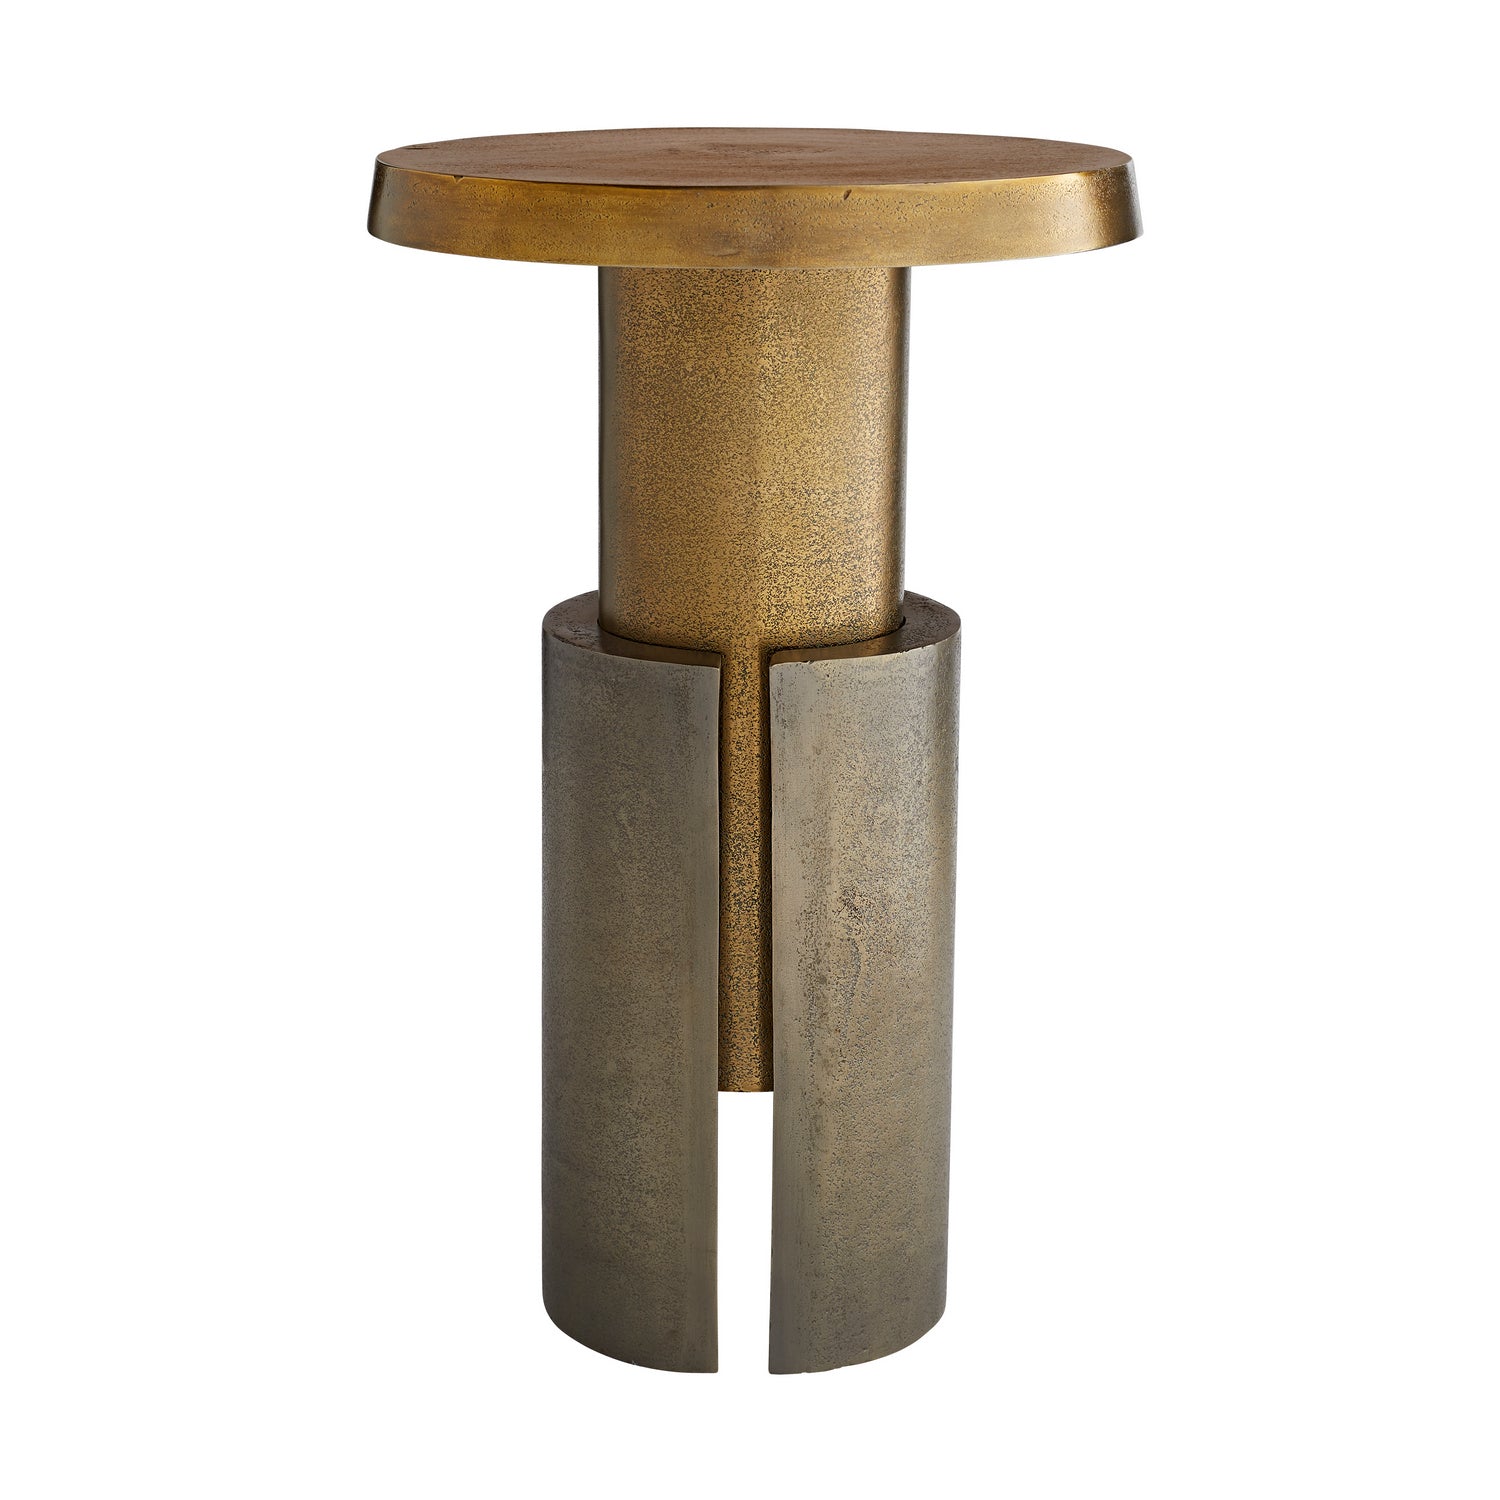 Accent Table from the Inara collection in Antique Brass finish